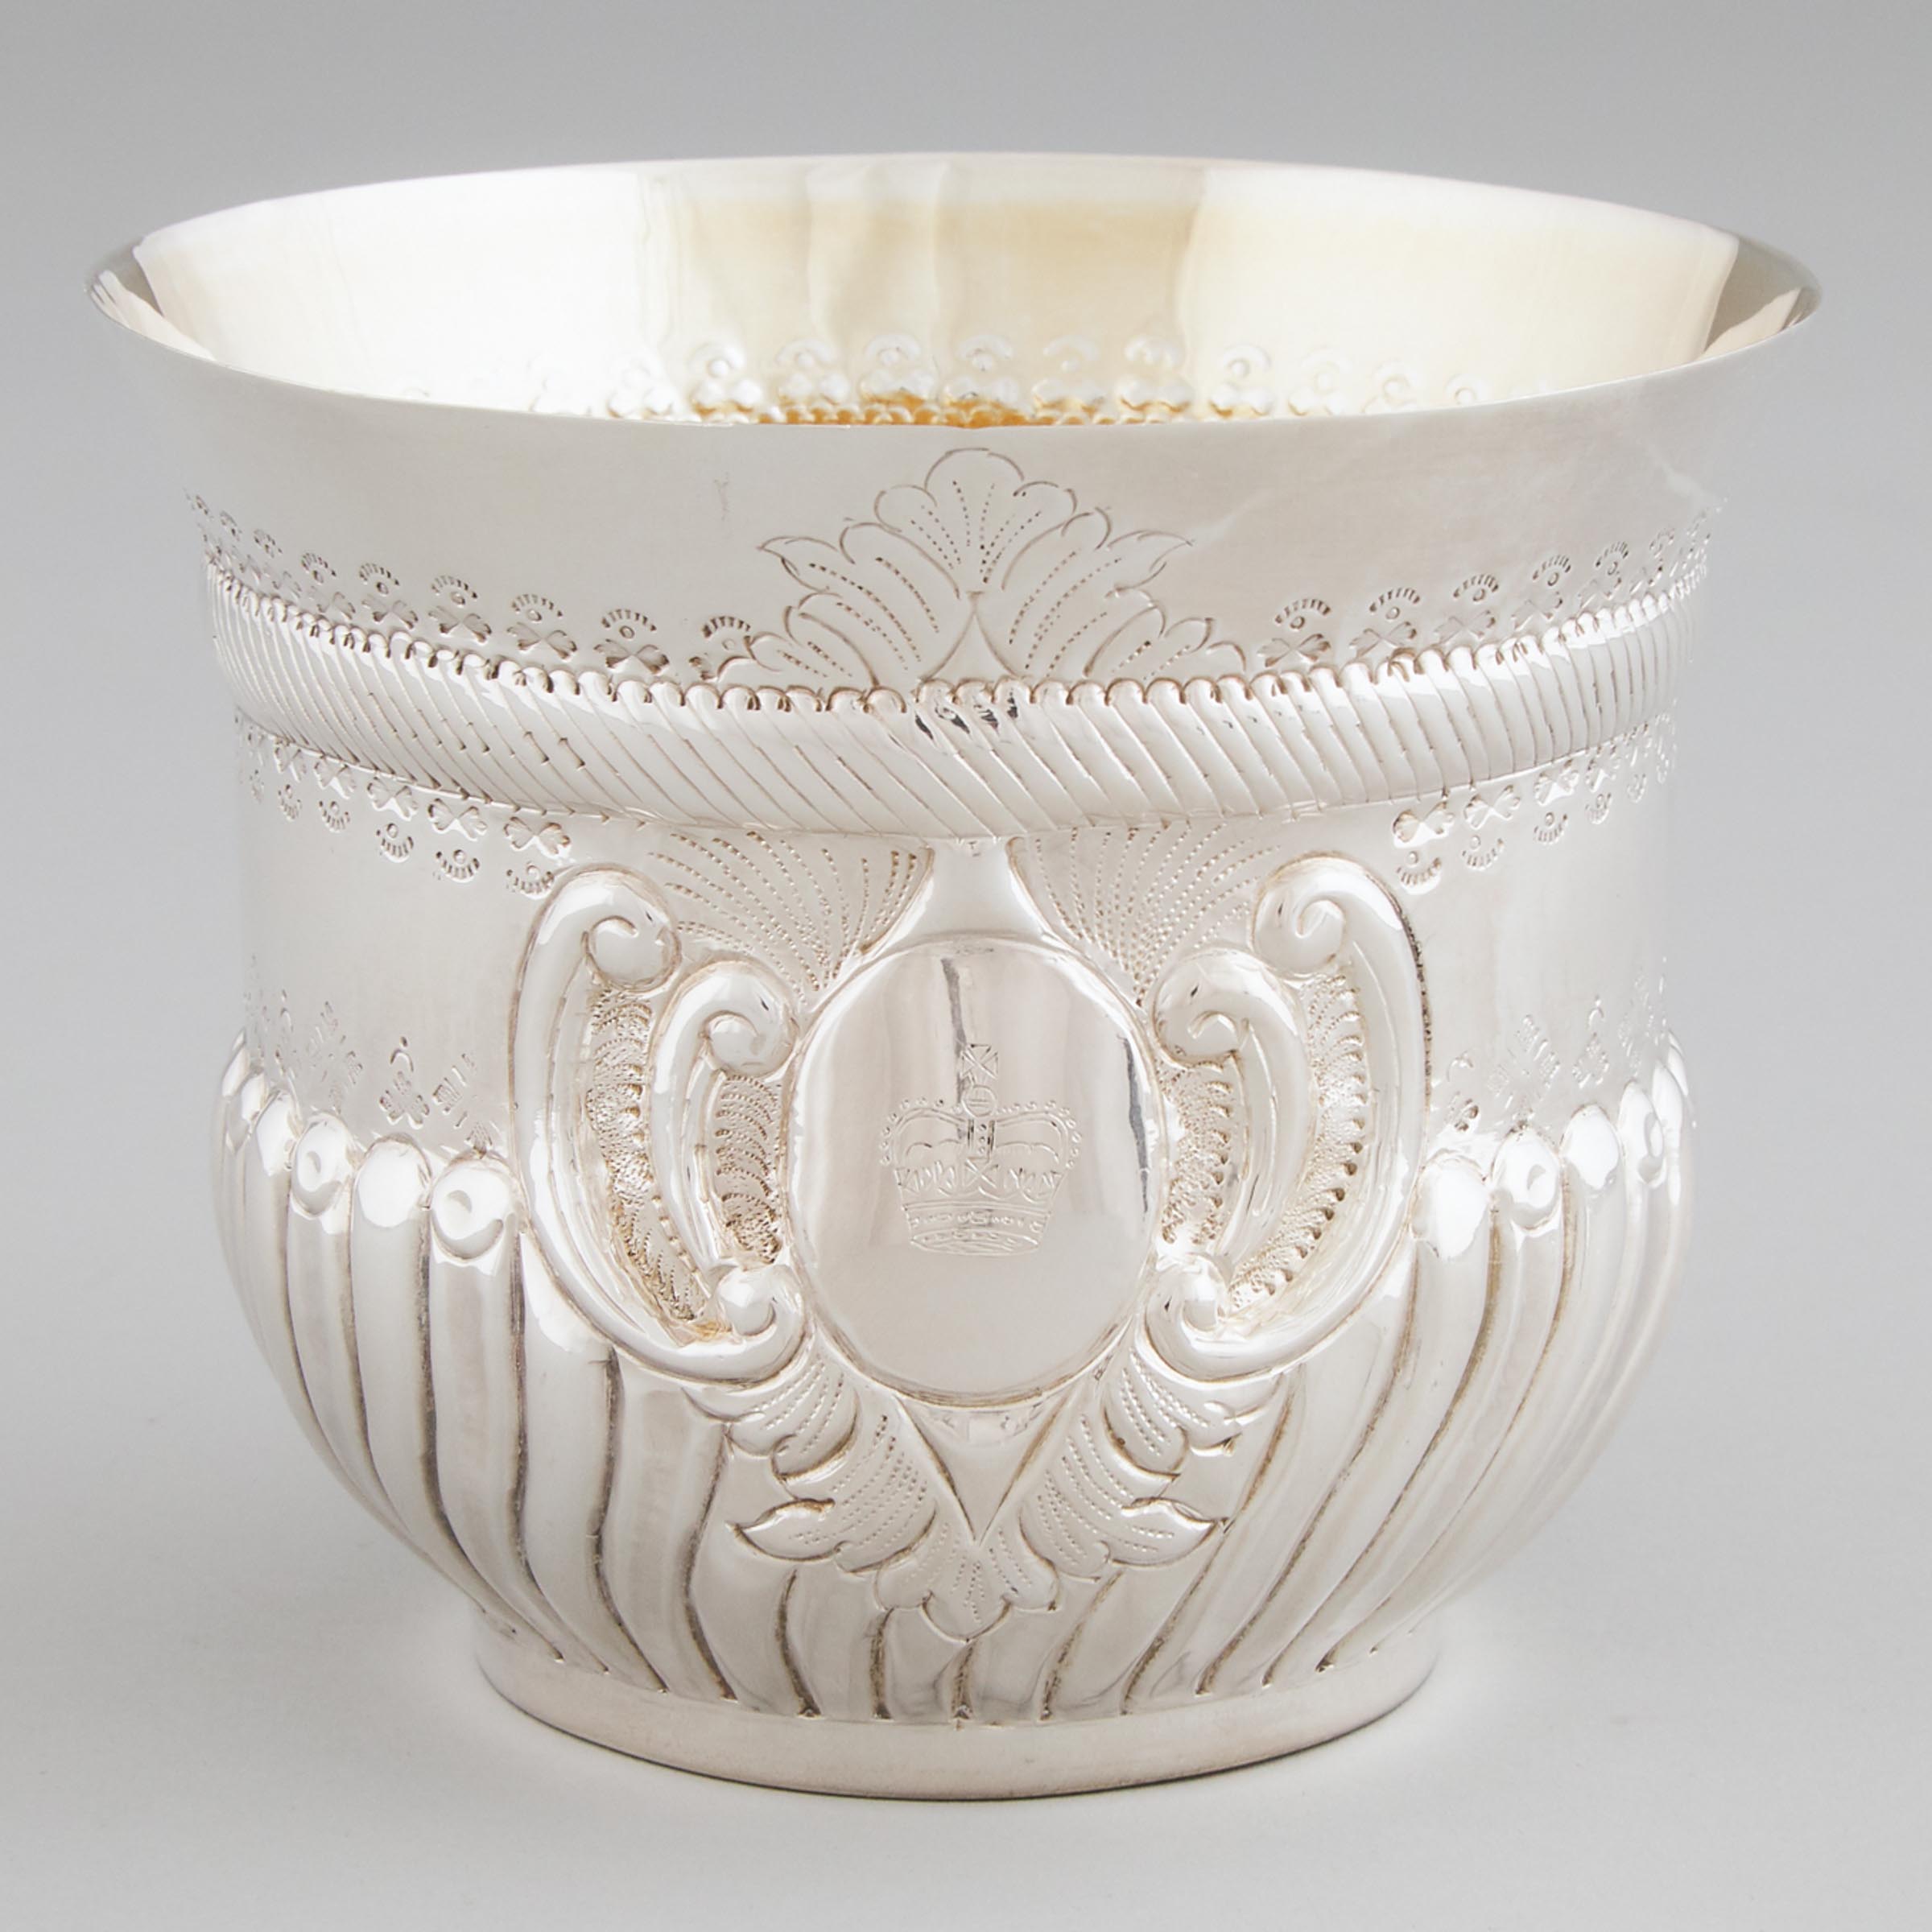 Indian Silver Caudle Cup, 20th century